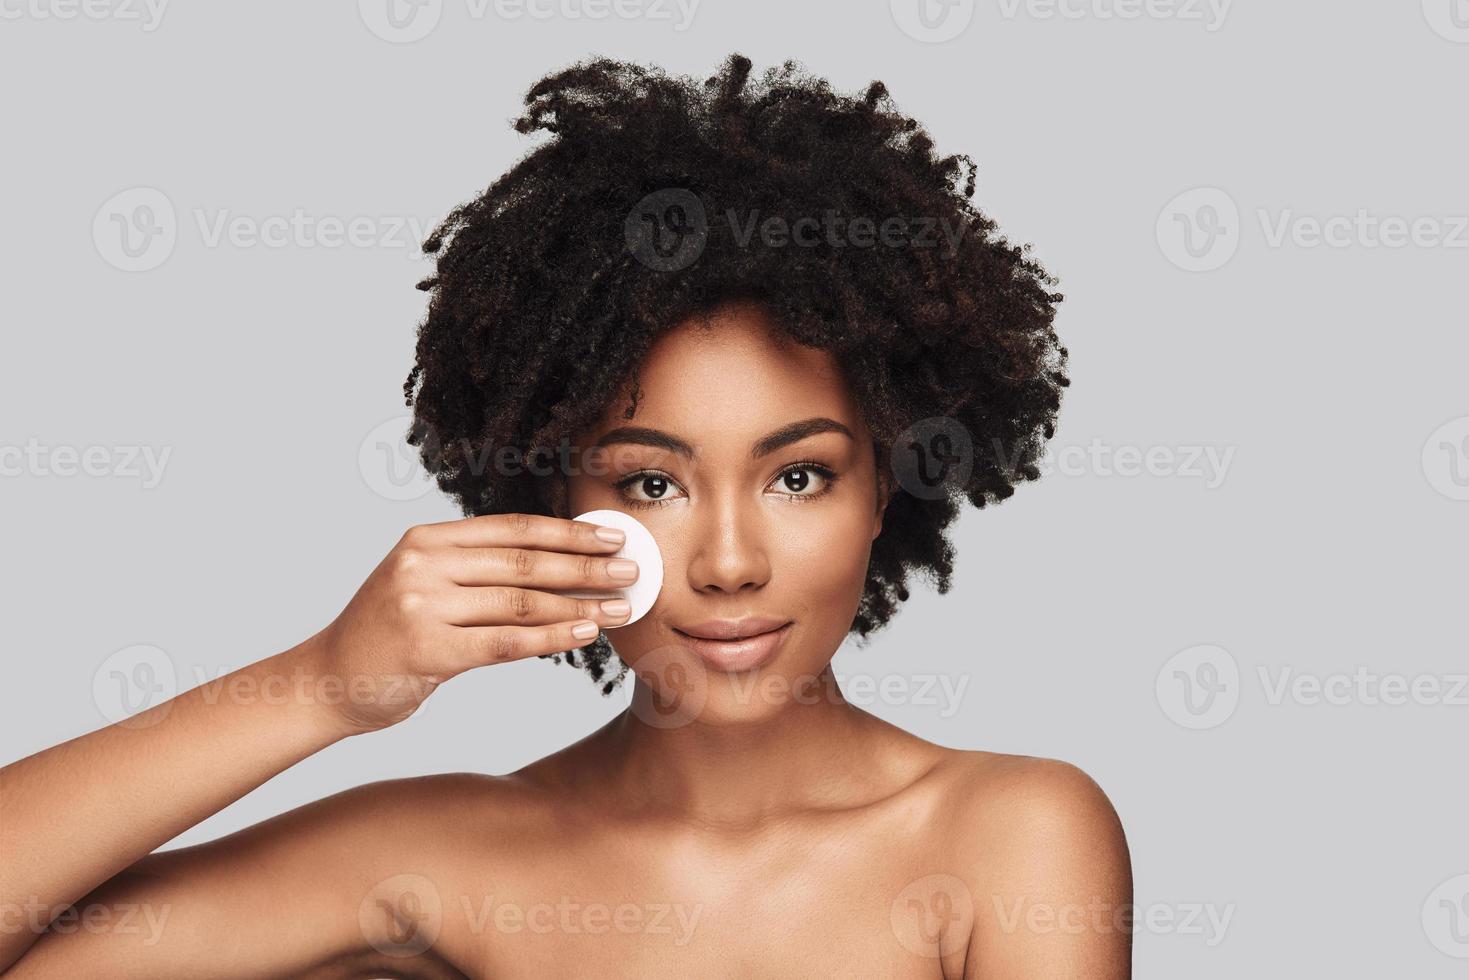 Pampering. Attractive young African woman applying cleaning sponge and smiling while standing against grey background photo